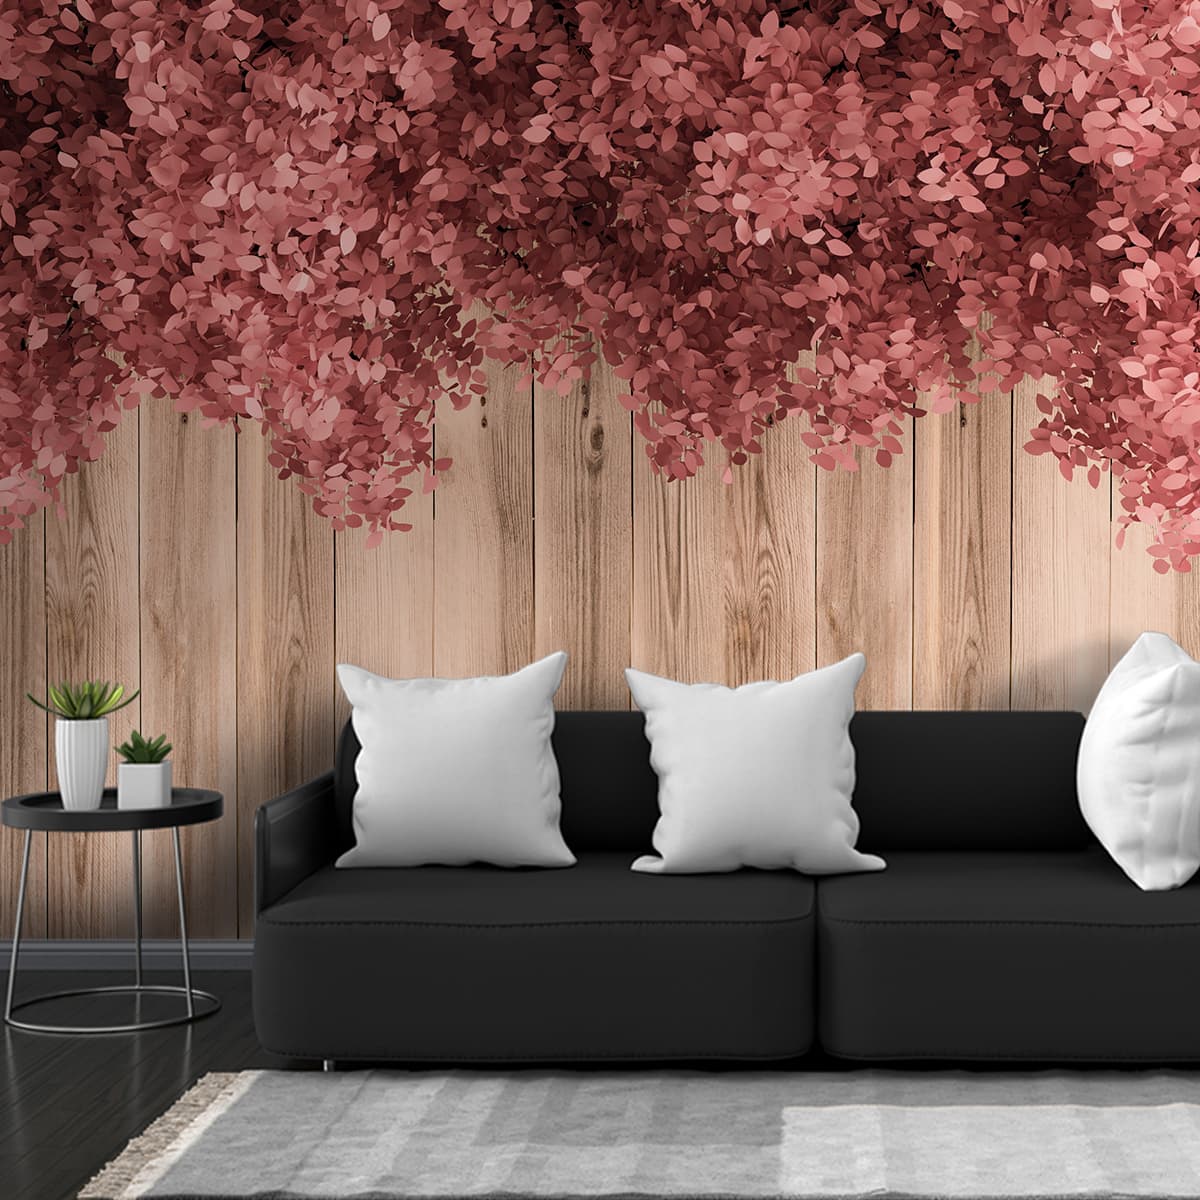 3D Pink Floral Wallpaper on Wooden Wall Look